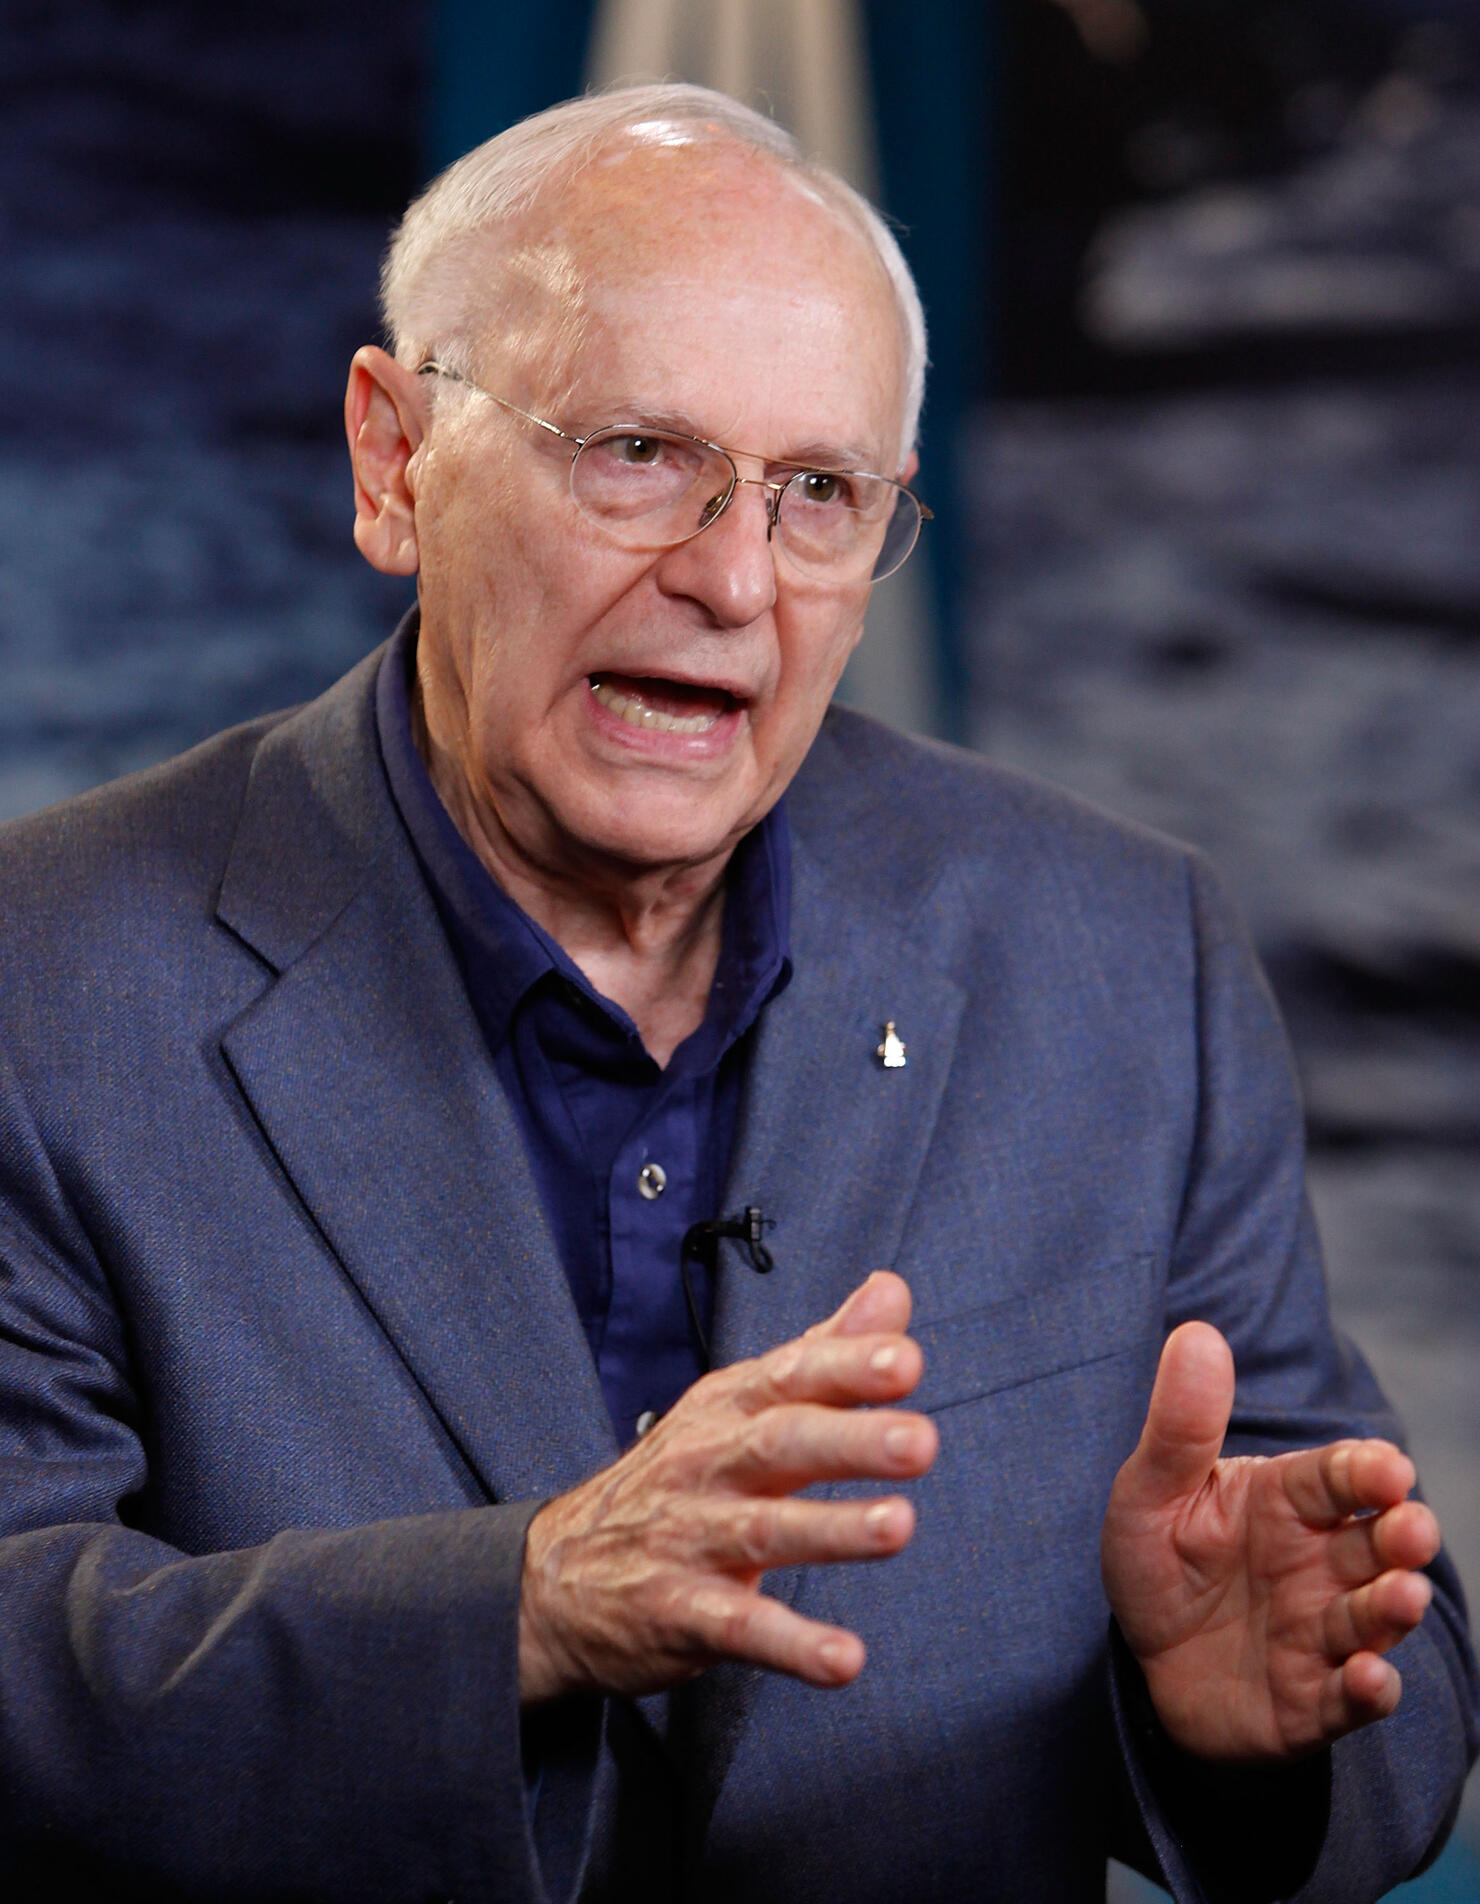 Alan Bean fourth person to walk on the moon dead at 86